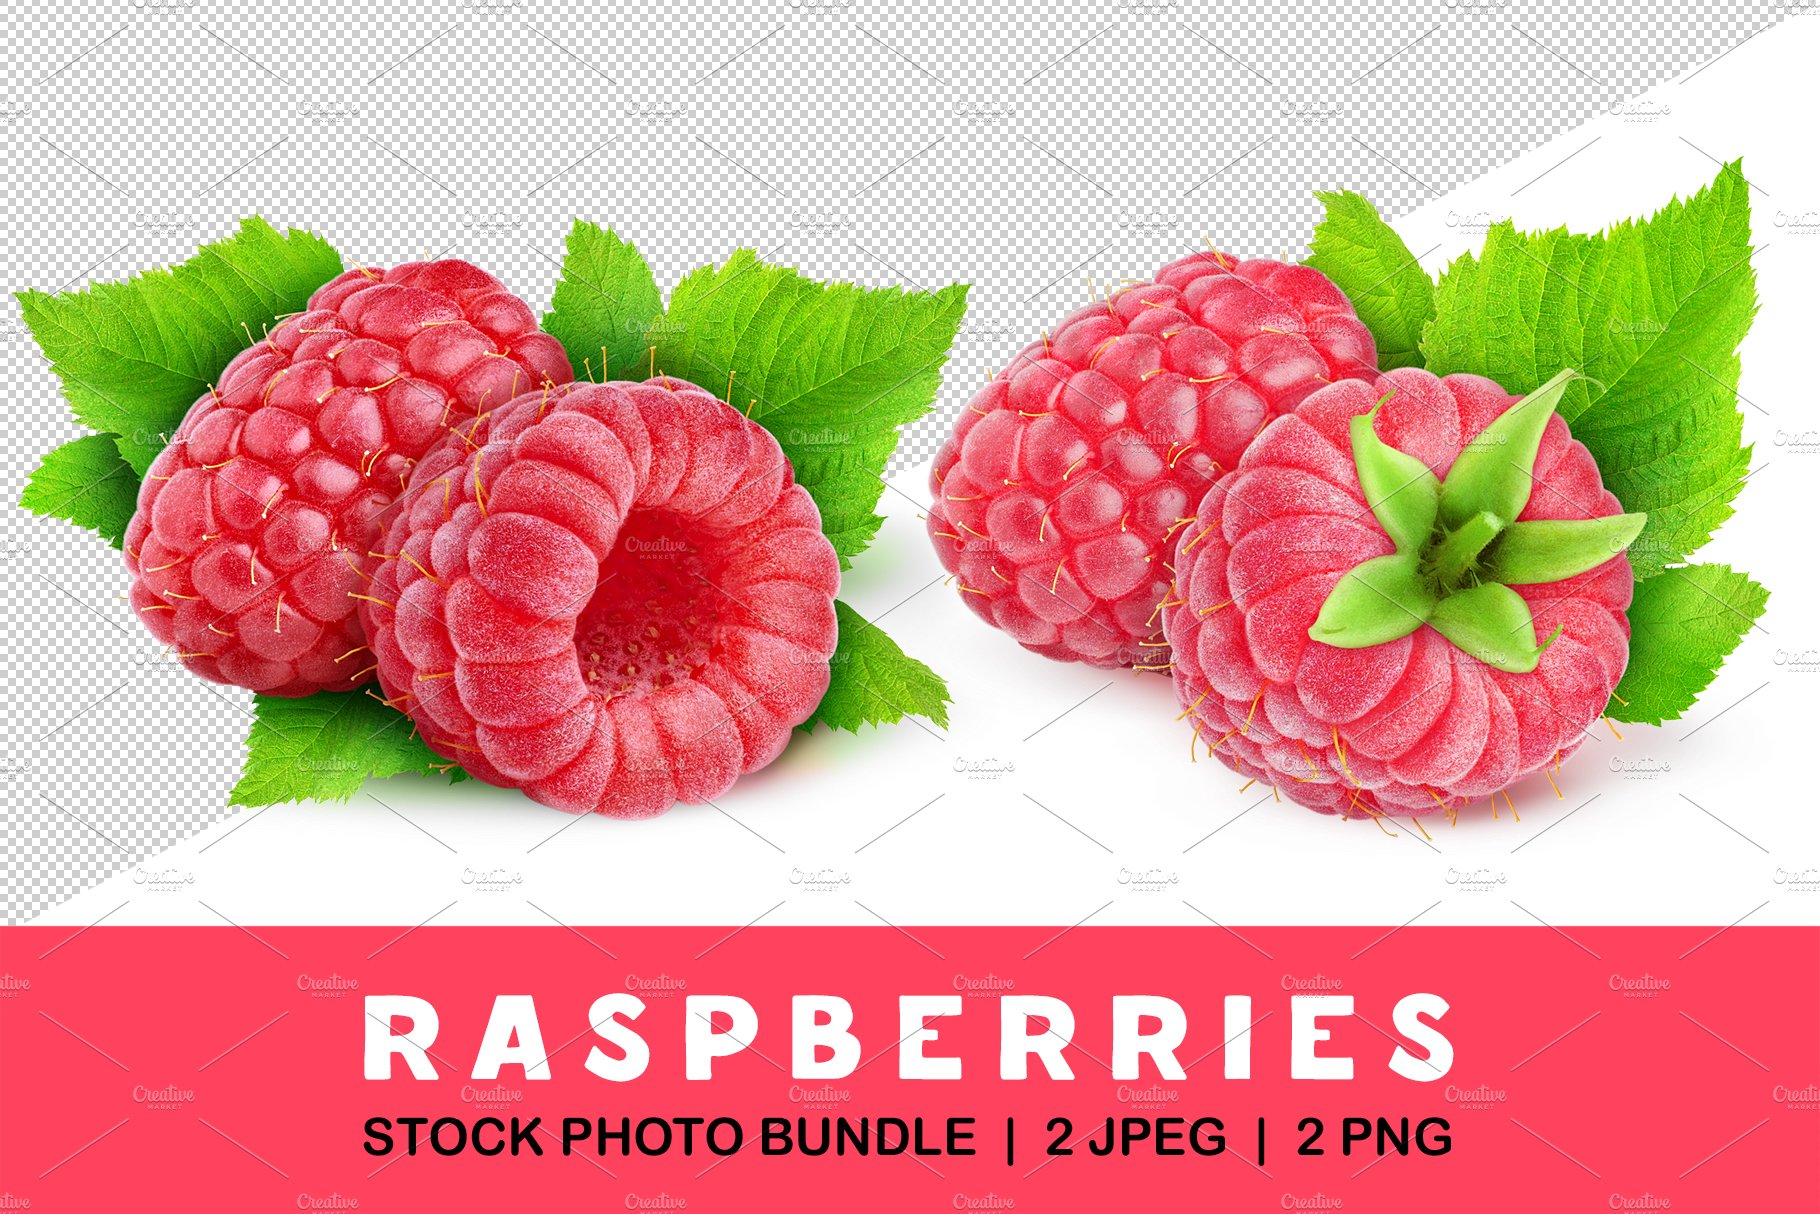 Two raspberries with leaf cover image.